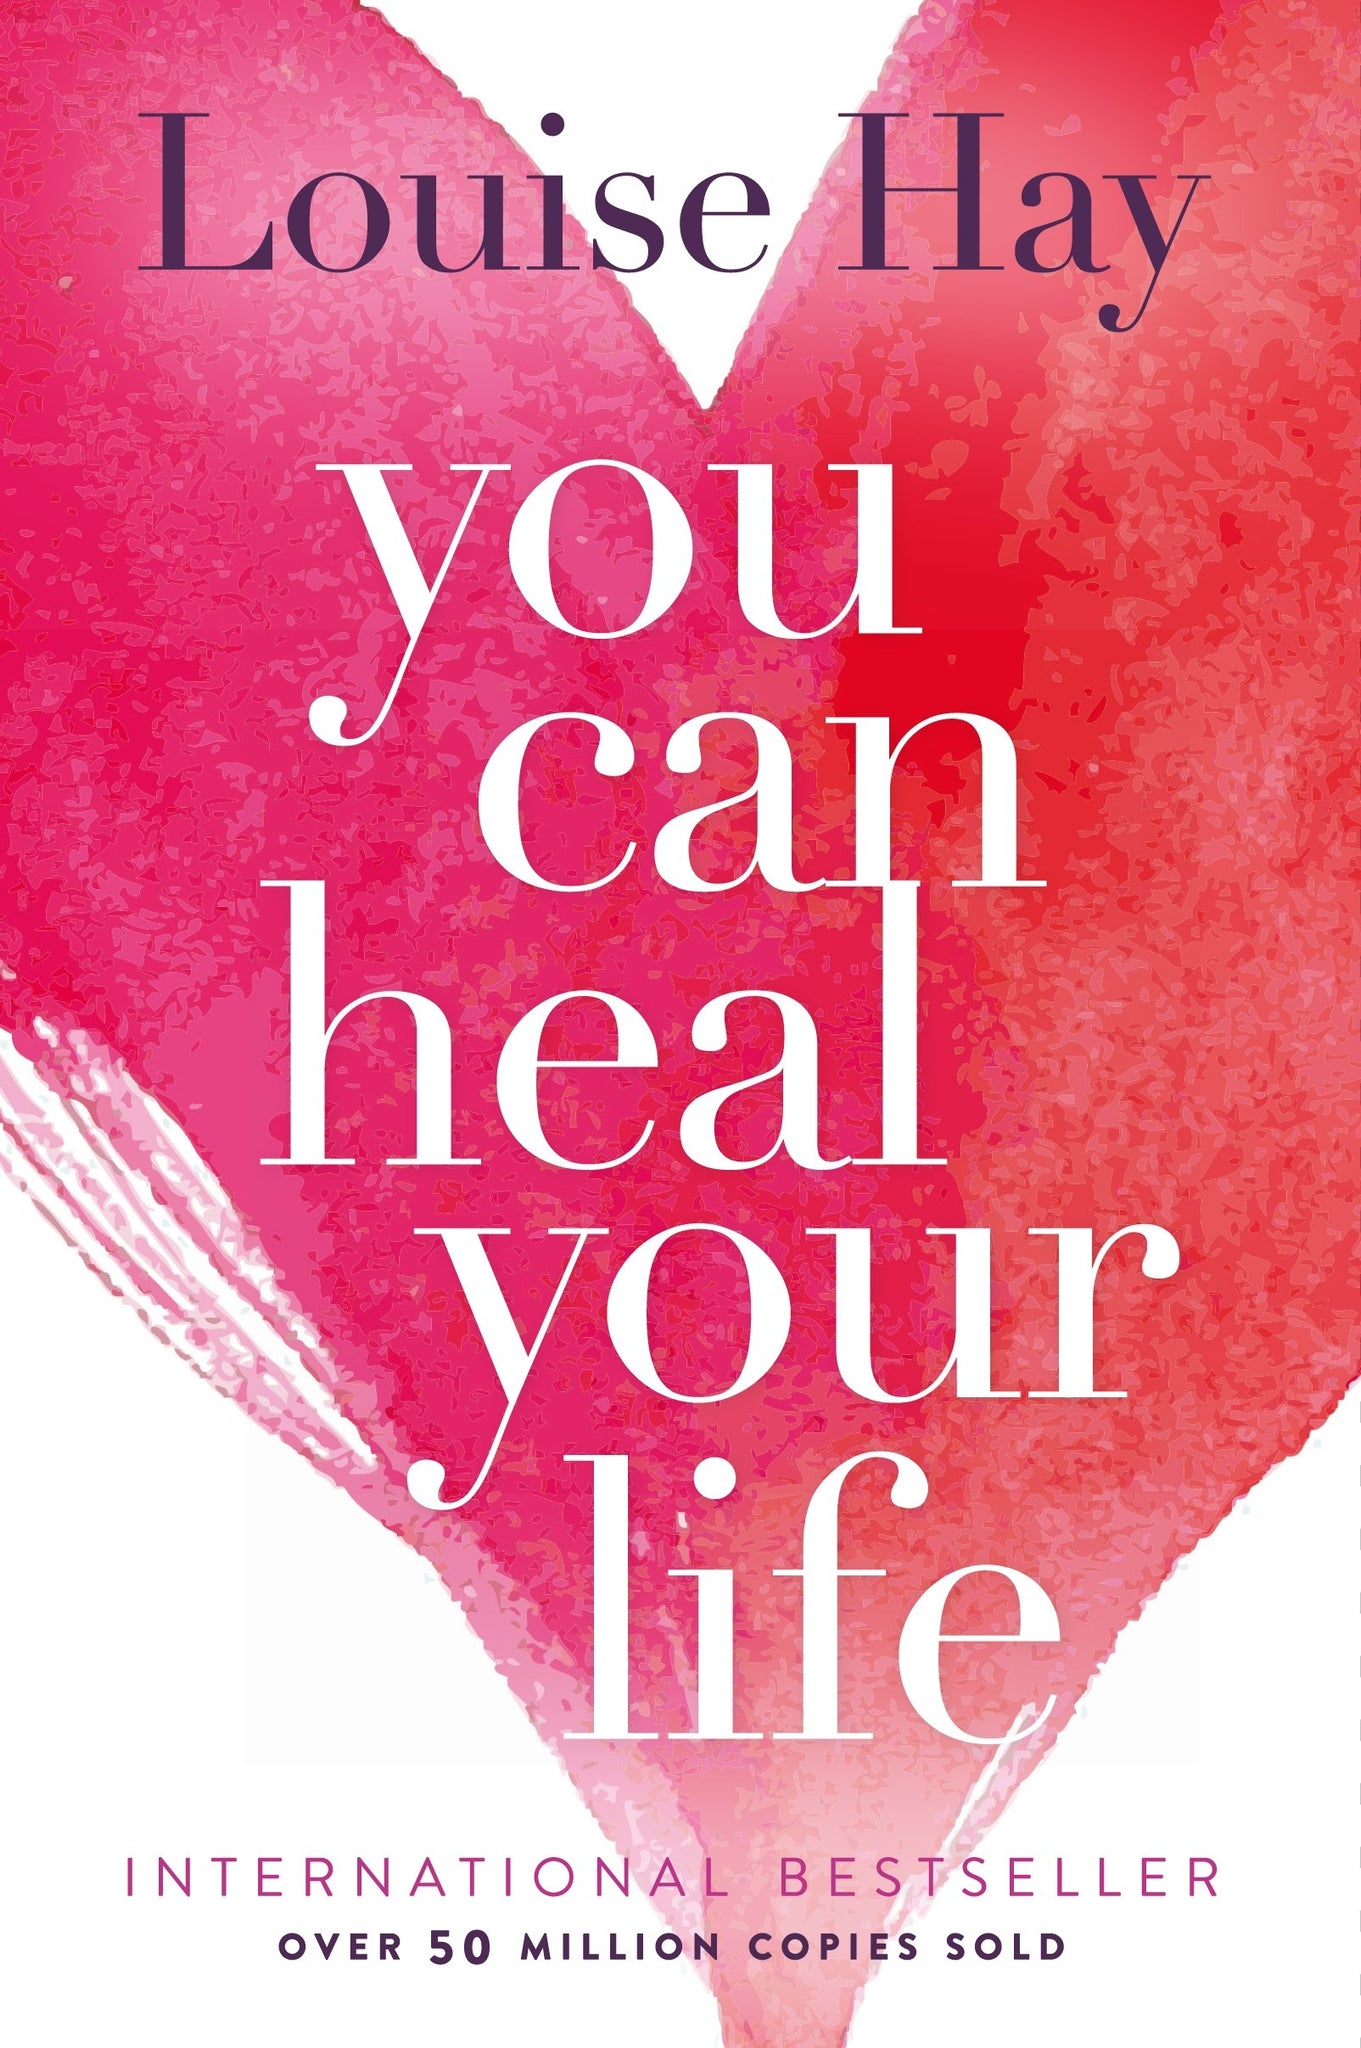 You Can Heal Your Life by Louise L. Hay